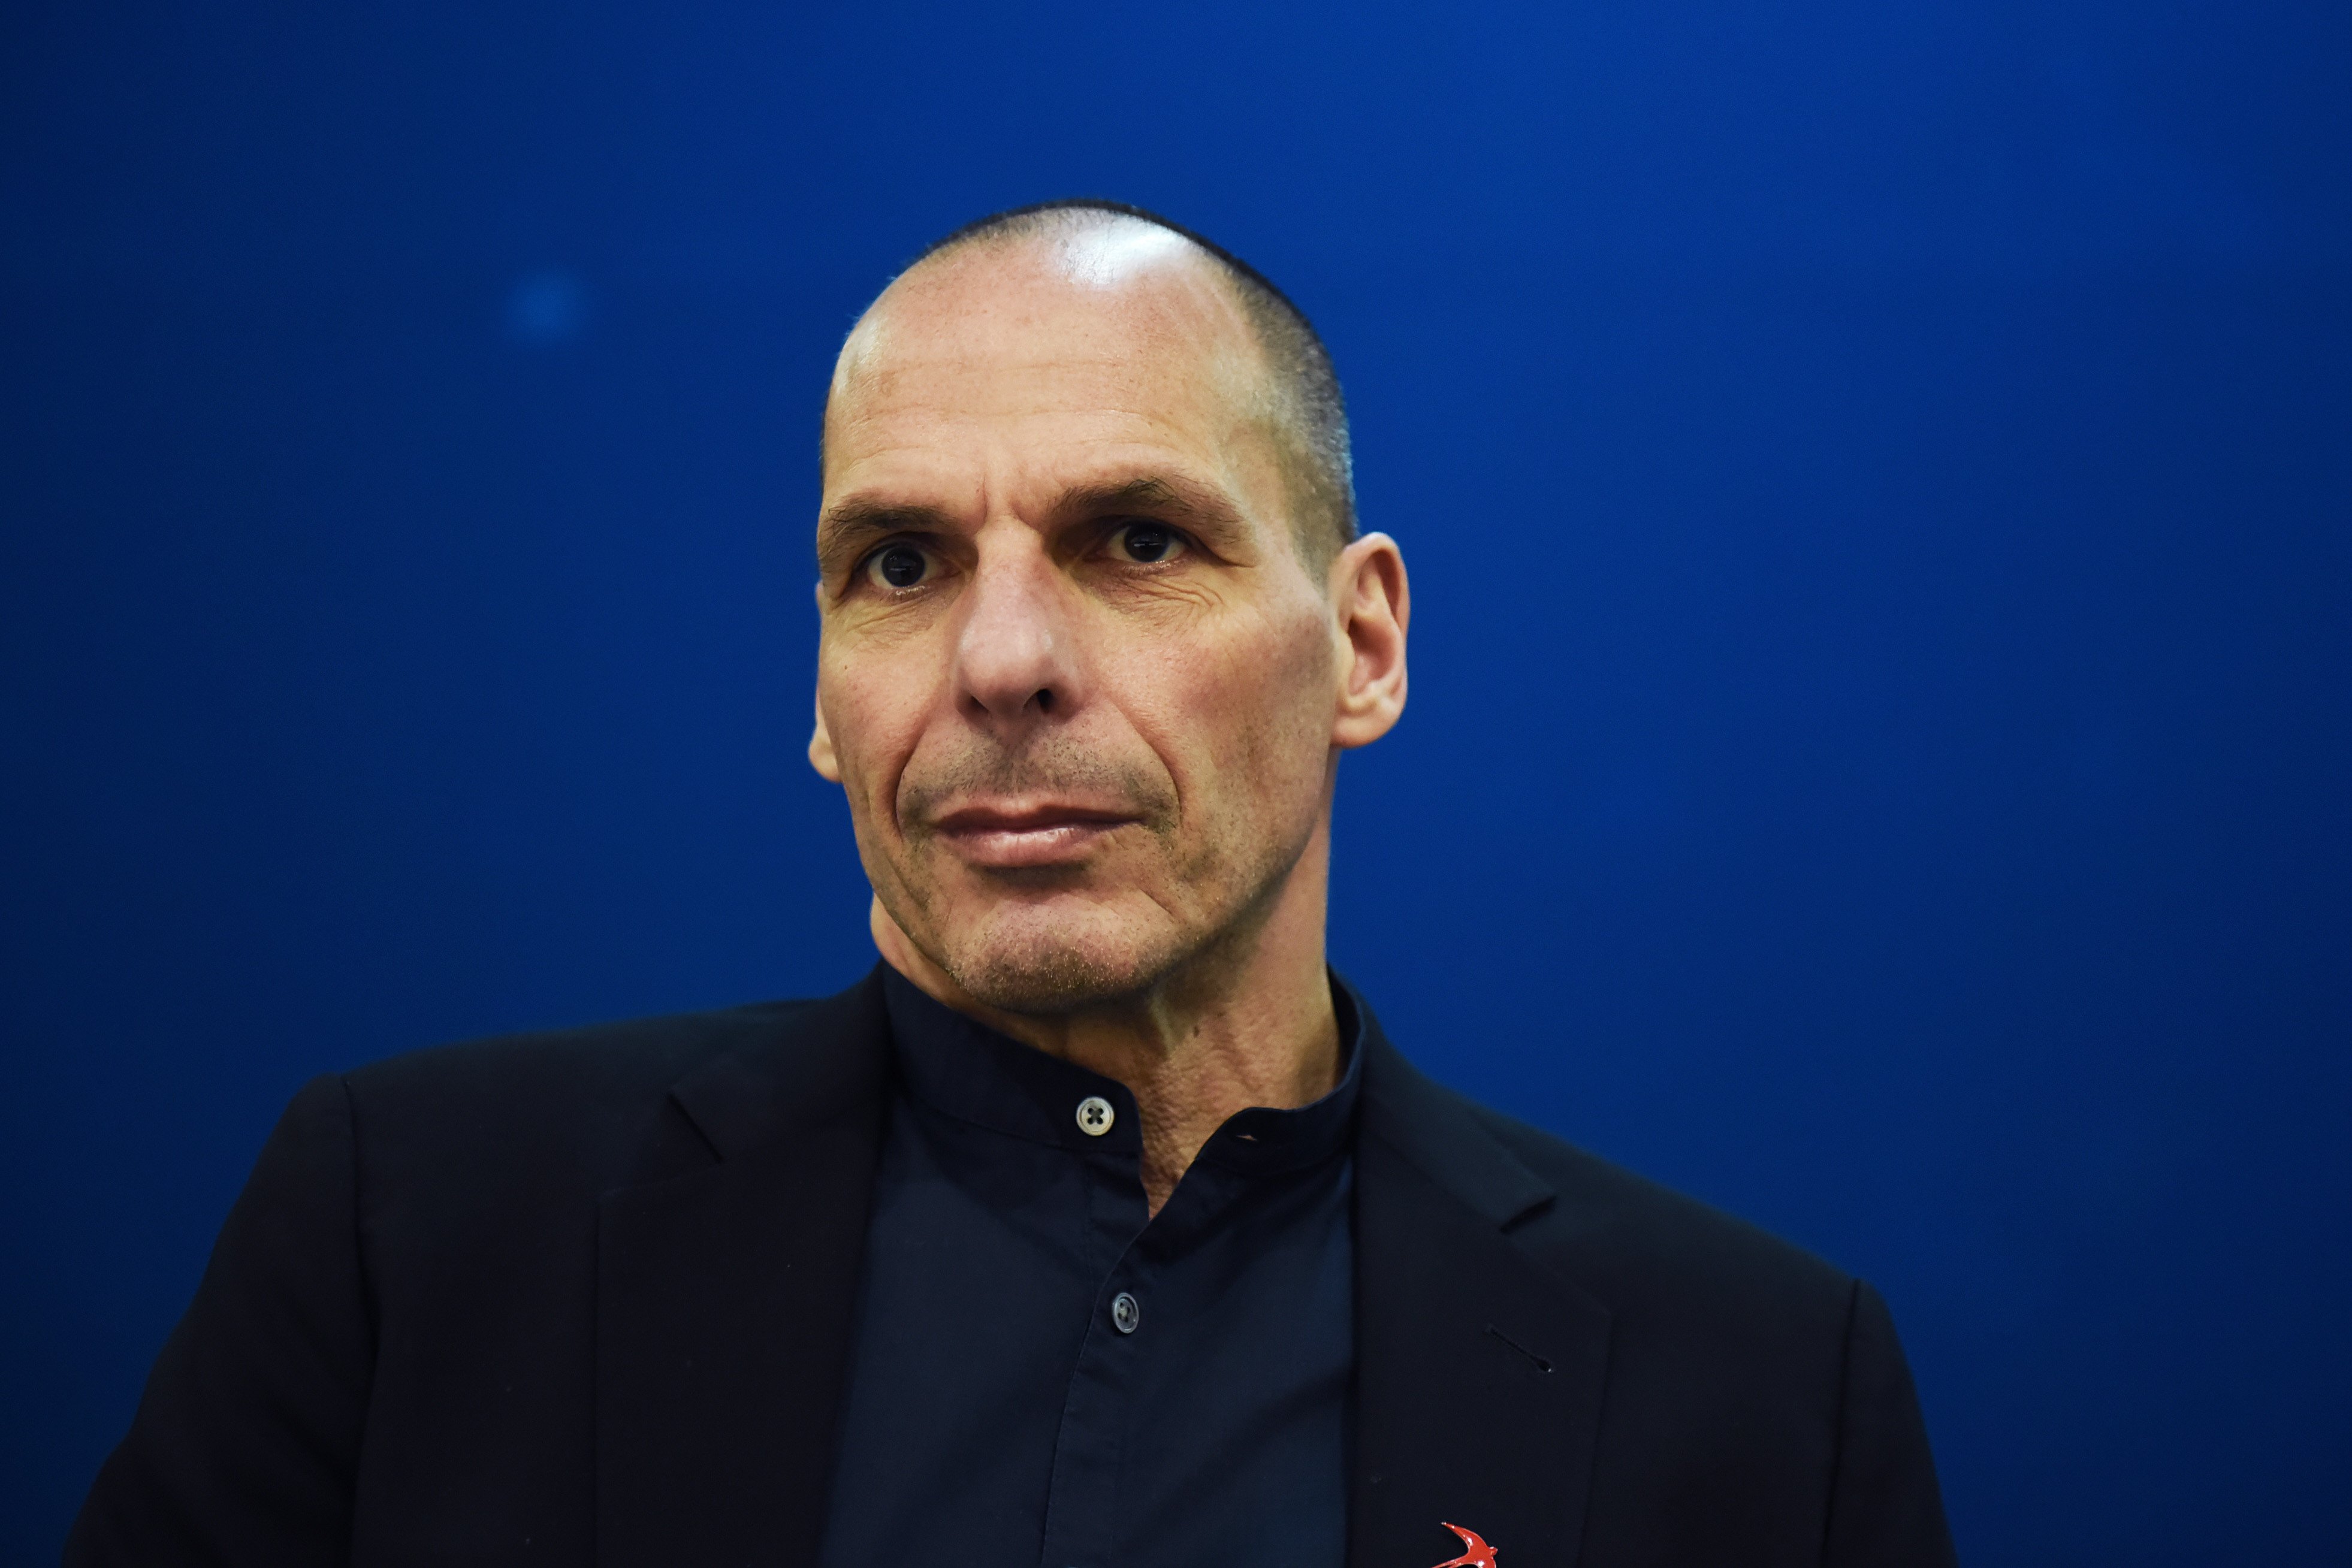 Former Greek finance minister Yanis Varoufakis says Australia’s purchase of nuclear-powered submarines would only force “China’s political class to close ranks around an authoritarian core”. Photo: Shutterstock